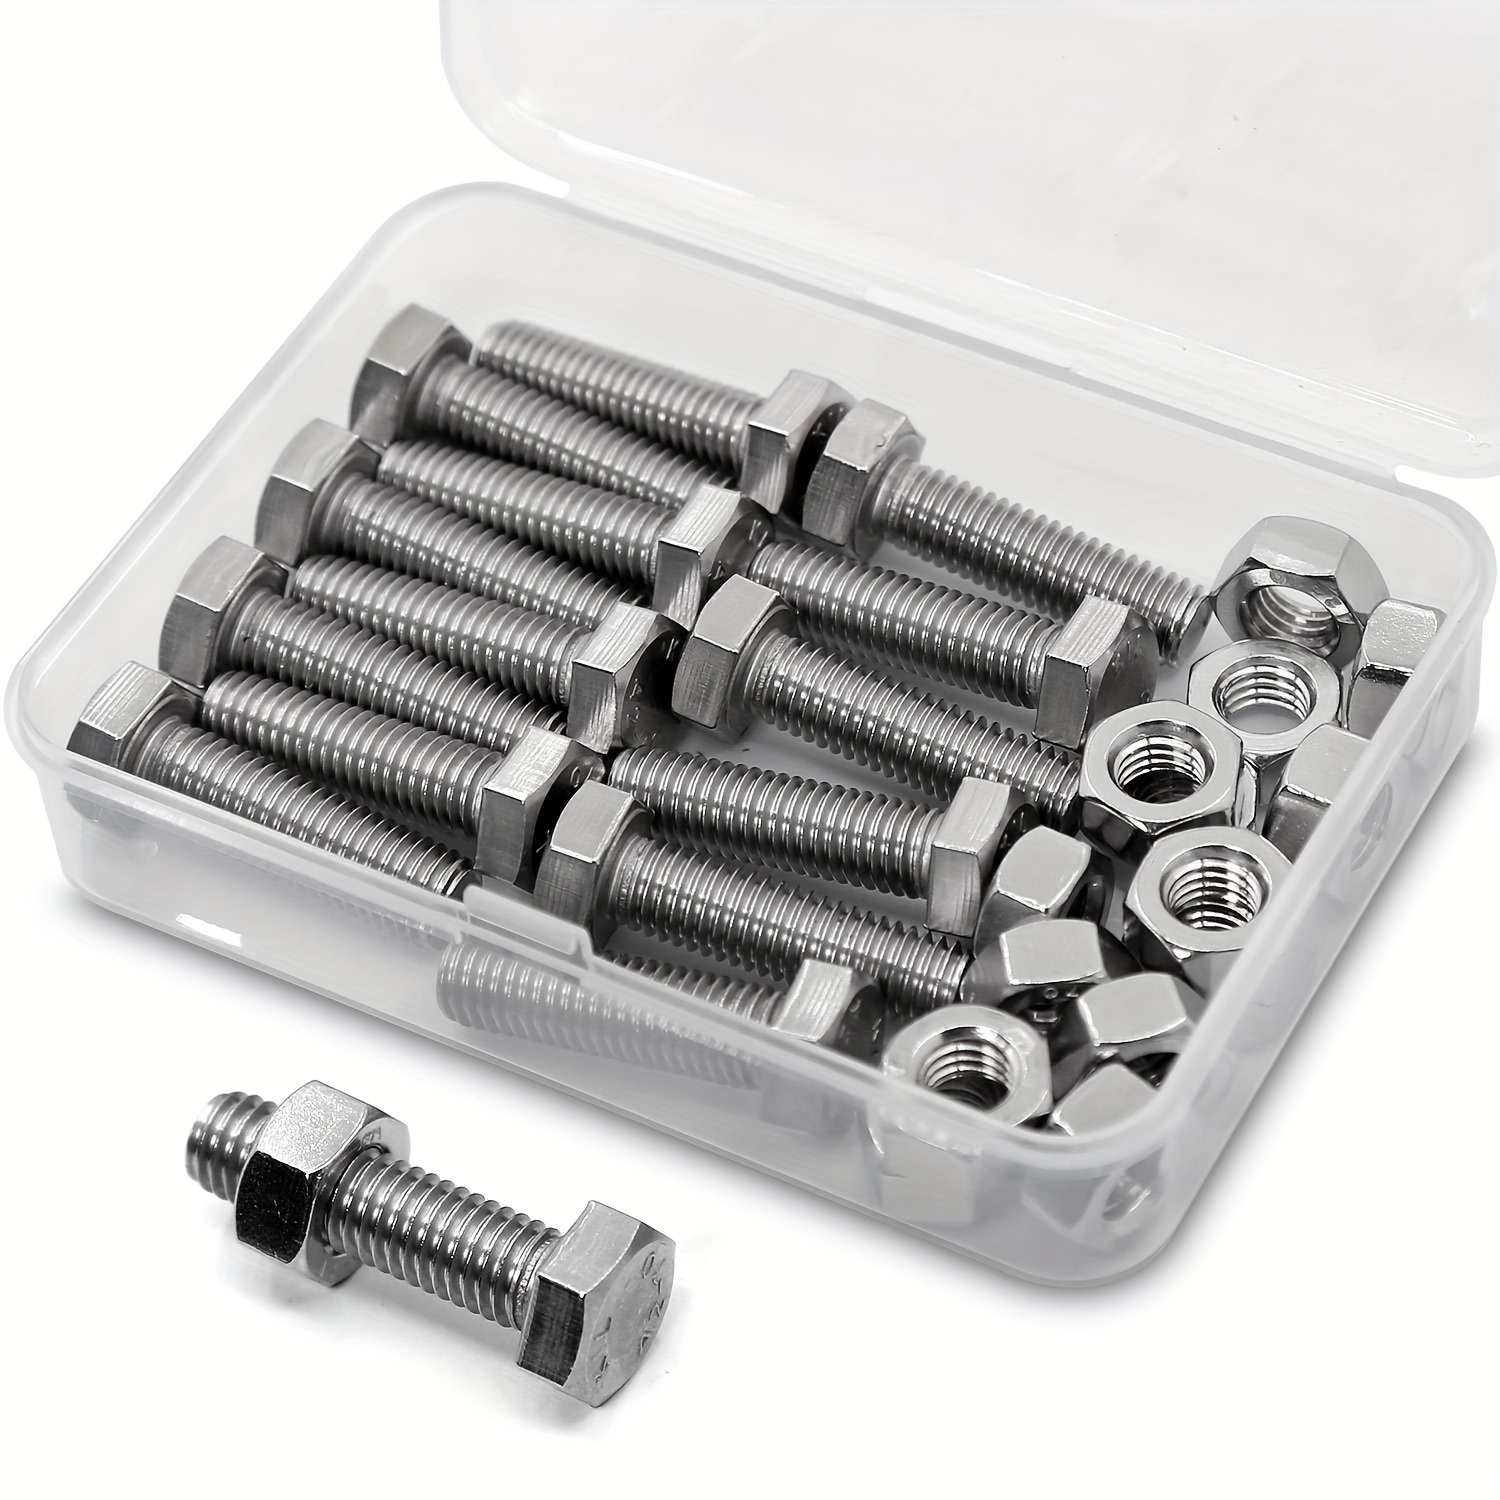 

10/15sets M8-1.25 X 20-70mm Hex Head Bolts And Nuts Set, 304 Stainless Steel, Full Thread, Bright Finish, Machine Thread